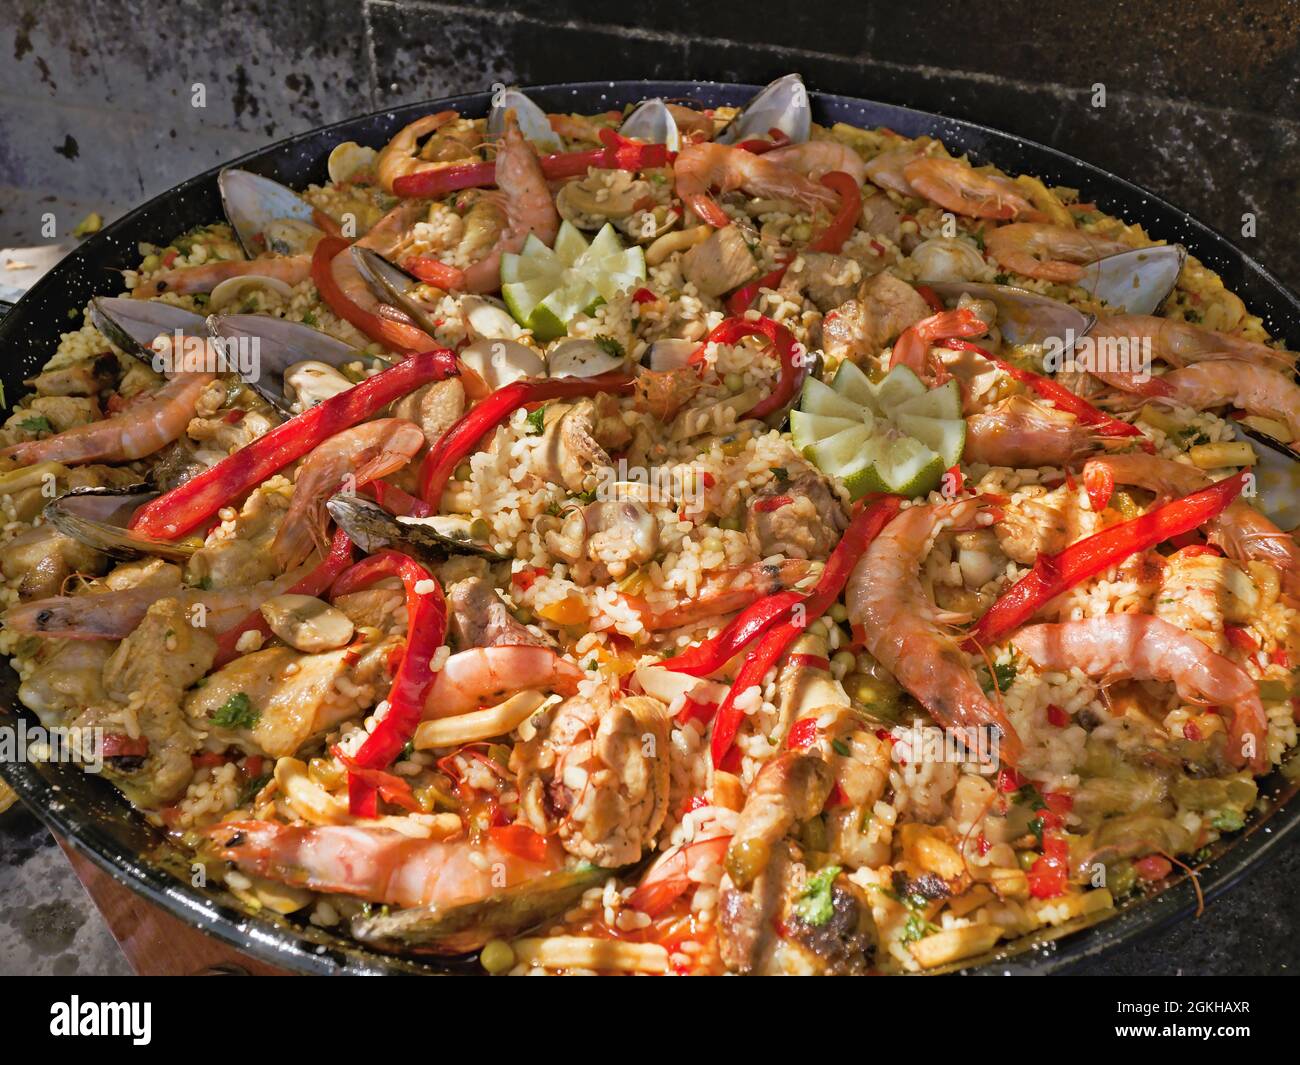 A fresh, large traditional paella with meat and seafood, garnished with lemon, in a large cast iron traditional paela pan, here on the island of Tener Stock Photo